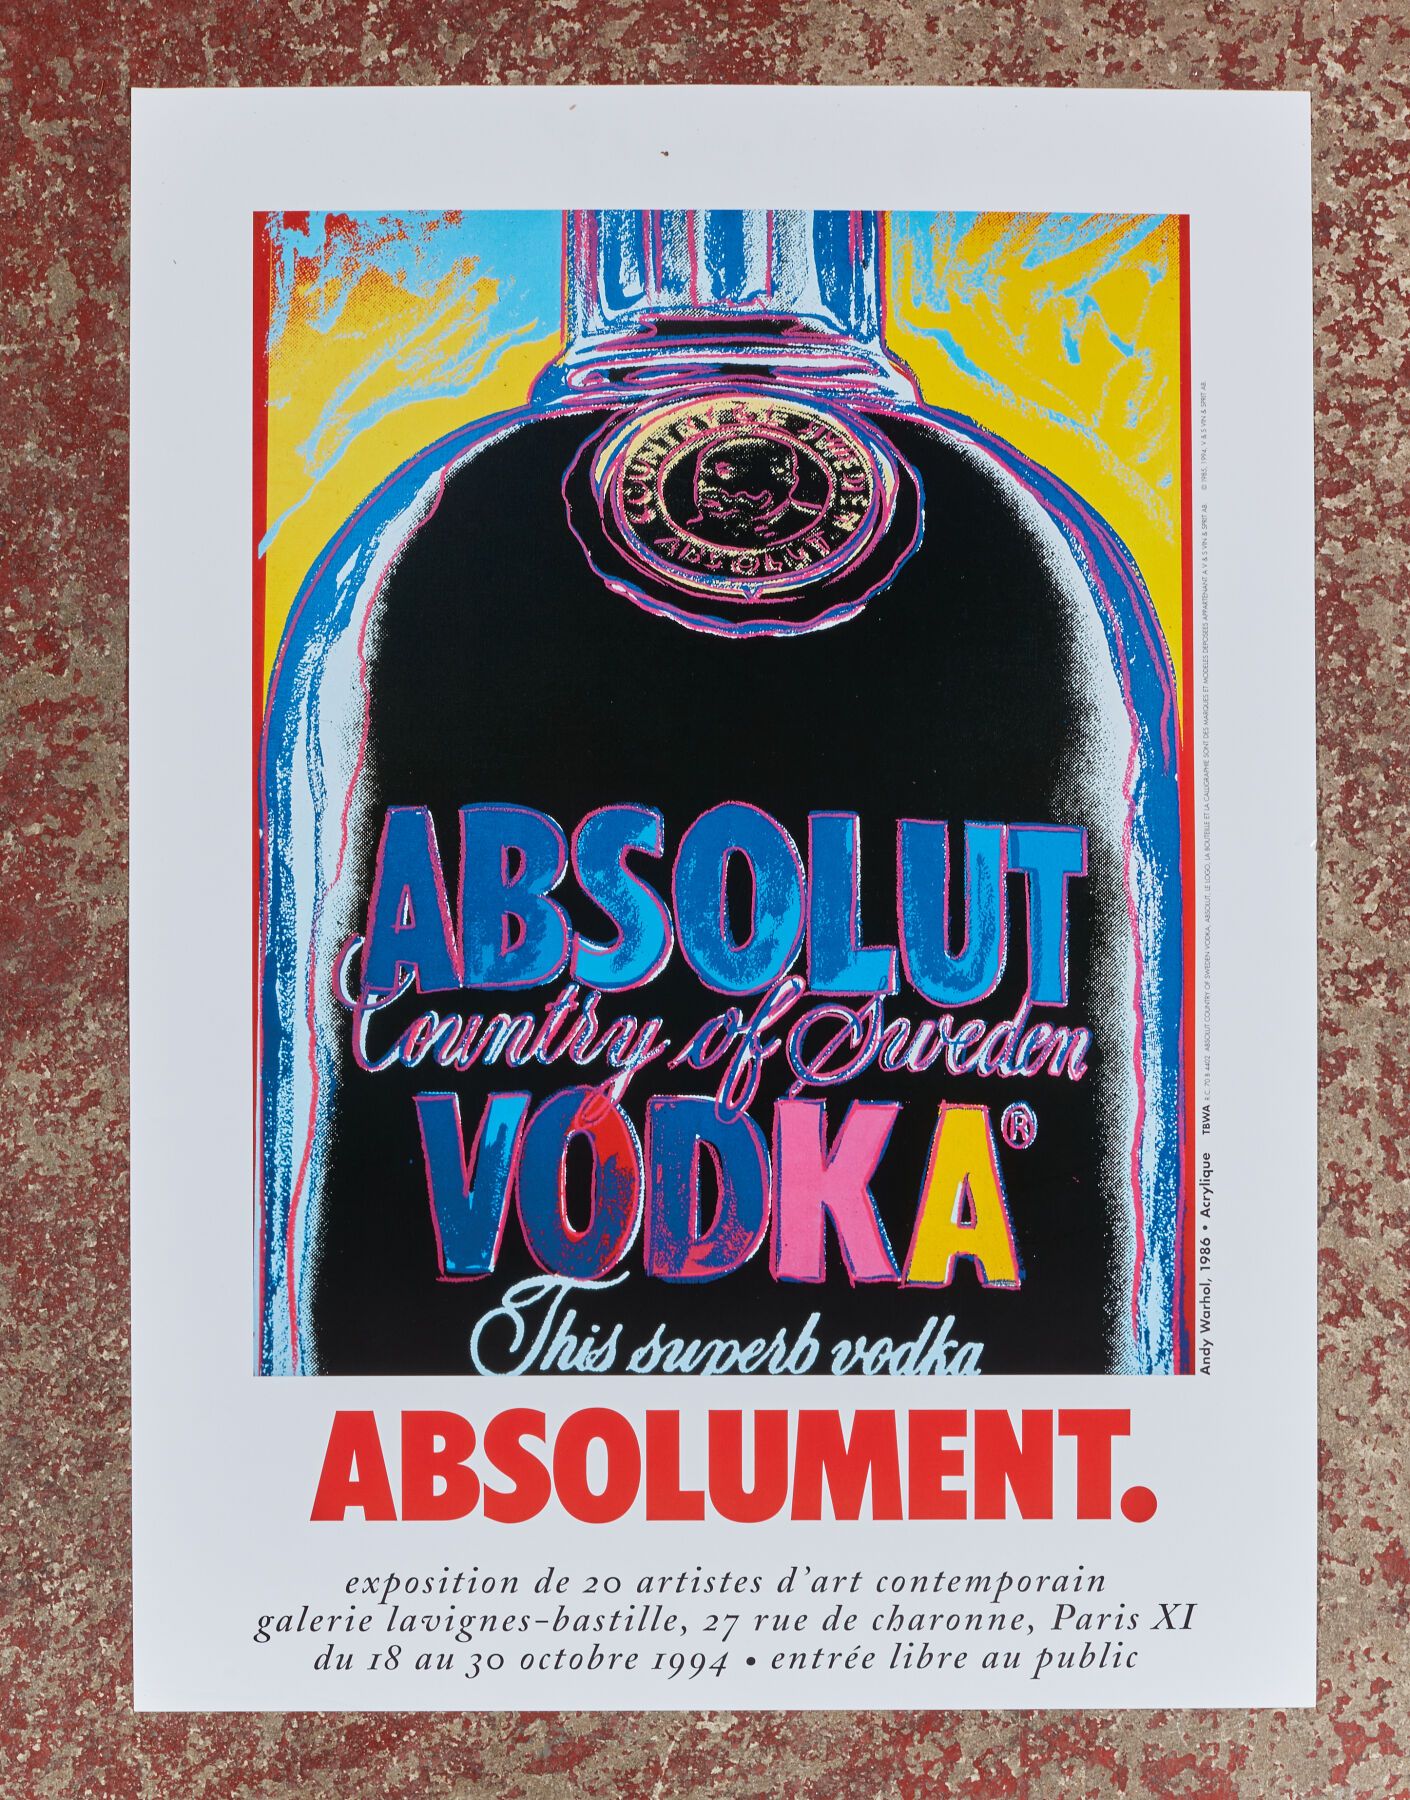 Null Andy WARHOL (from).
Absolut. (Absolut vodka) - 1986.
Poster for the exhibit&hellip;